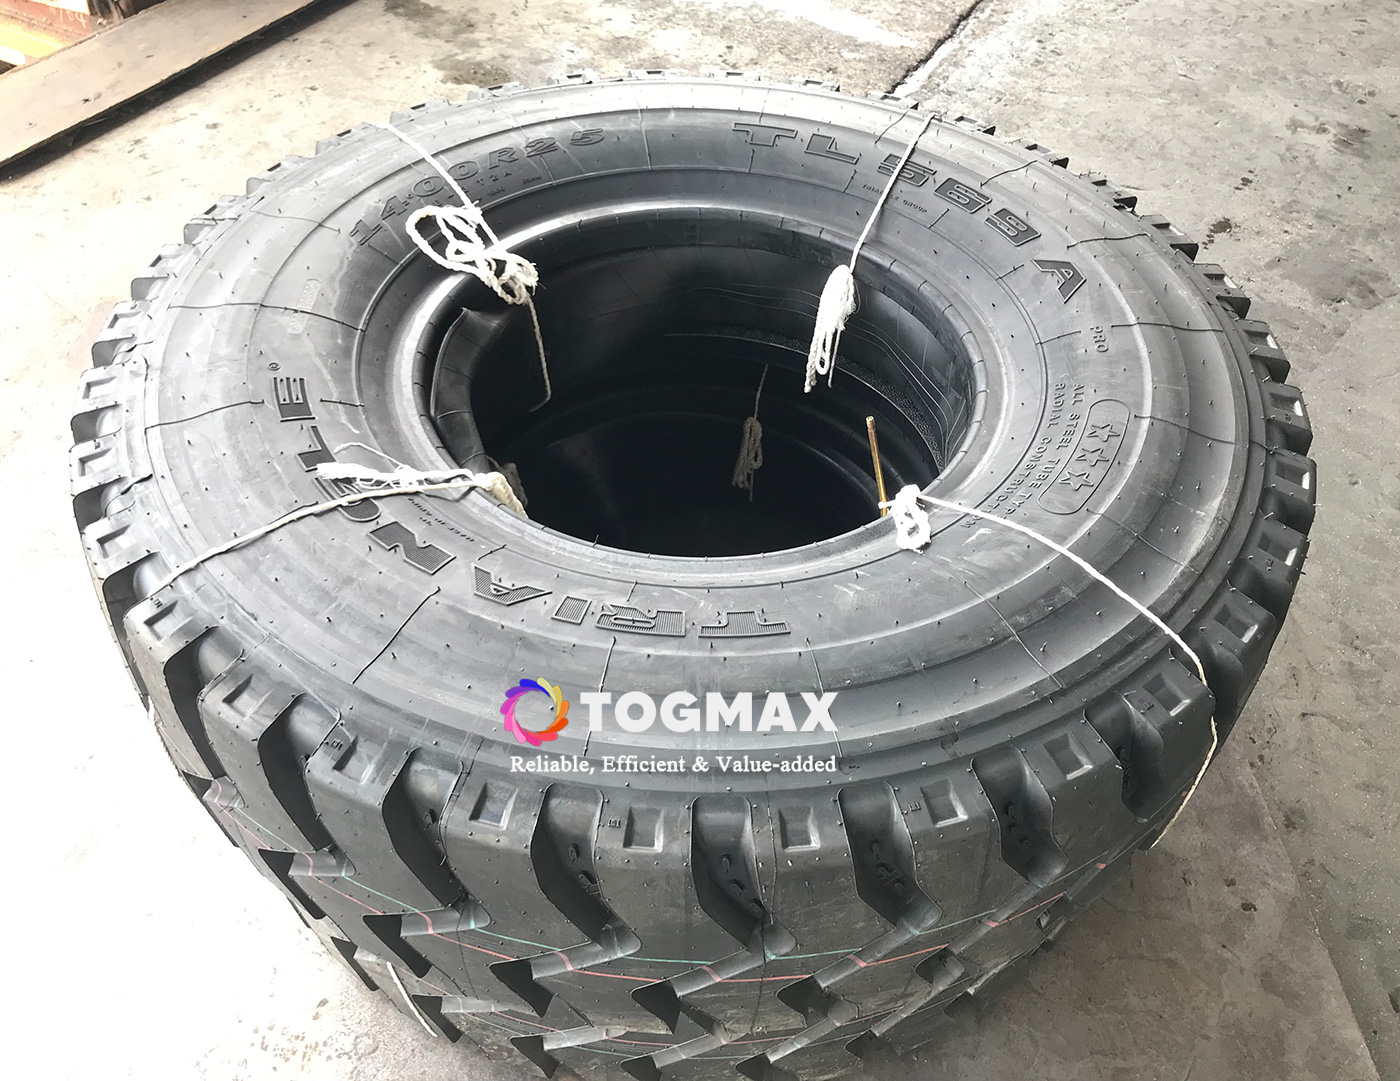 Triangle_TL569A_1400R25_Tyres_Sidewall_Details_for_Mining_Wide_Body_Dump_Trucks_TogMax_Group_Fleet_Solutions_Provider